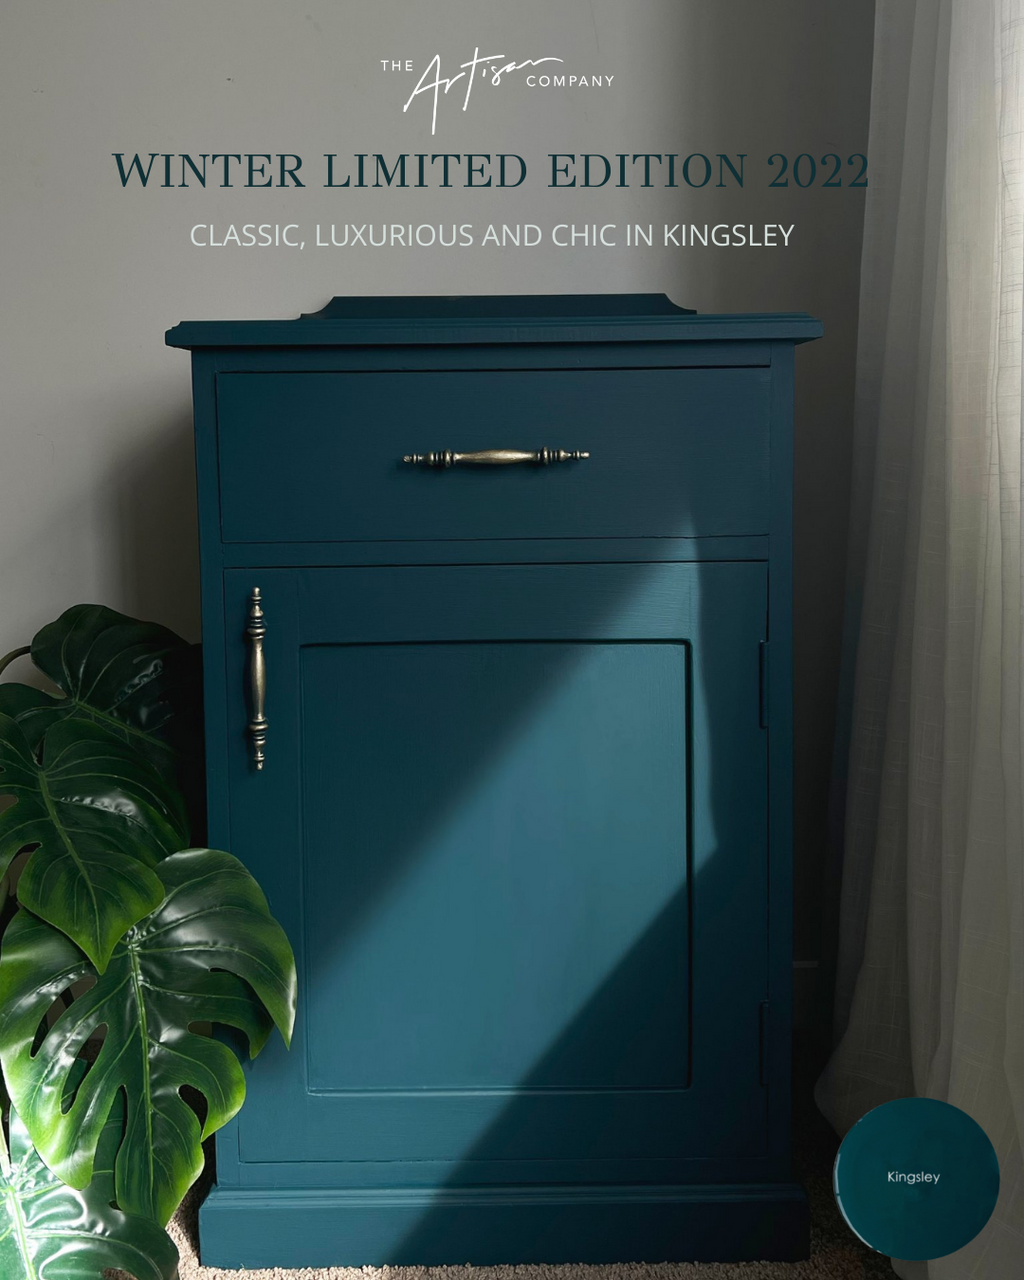 Previous Limited Edition Winter 2022 - Kingsley - 1L Premium Chalk Paint - Special Order